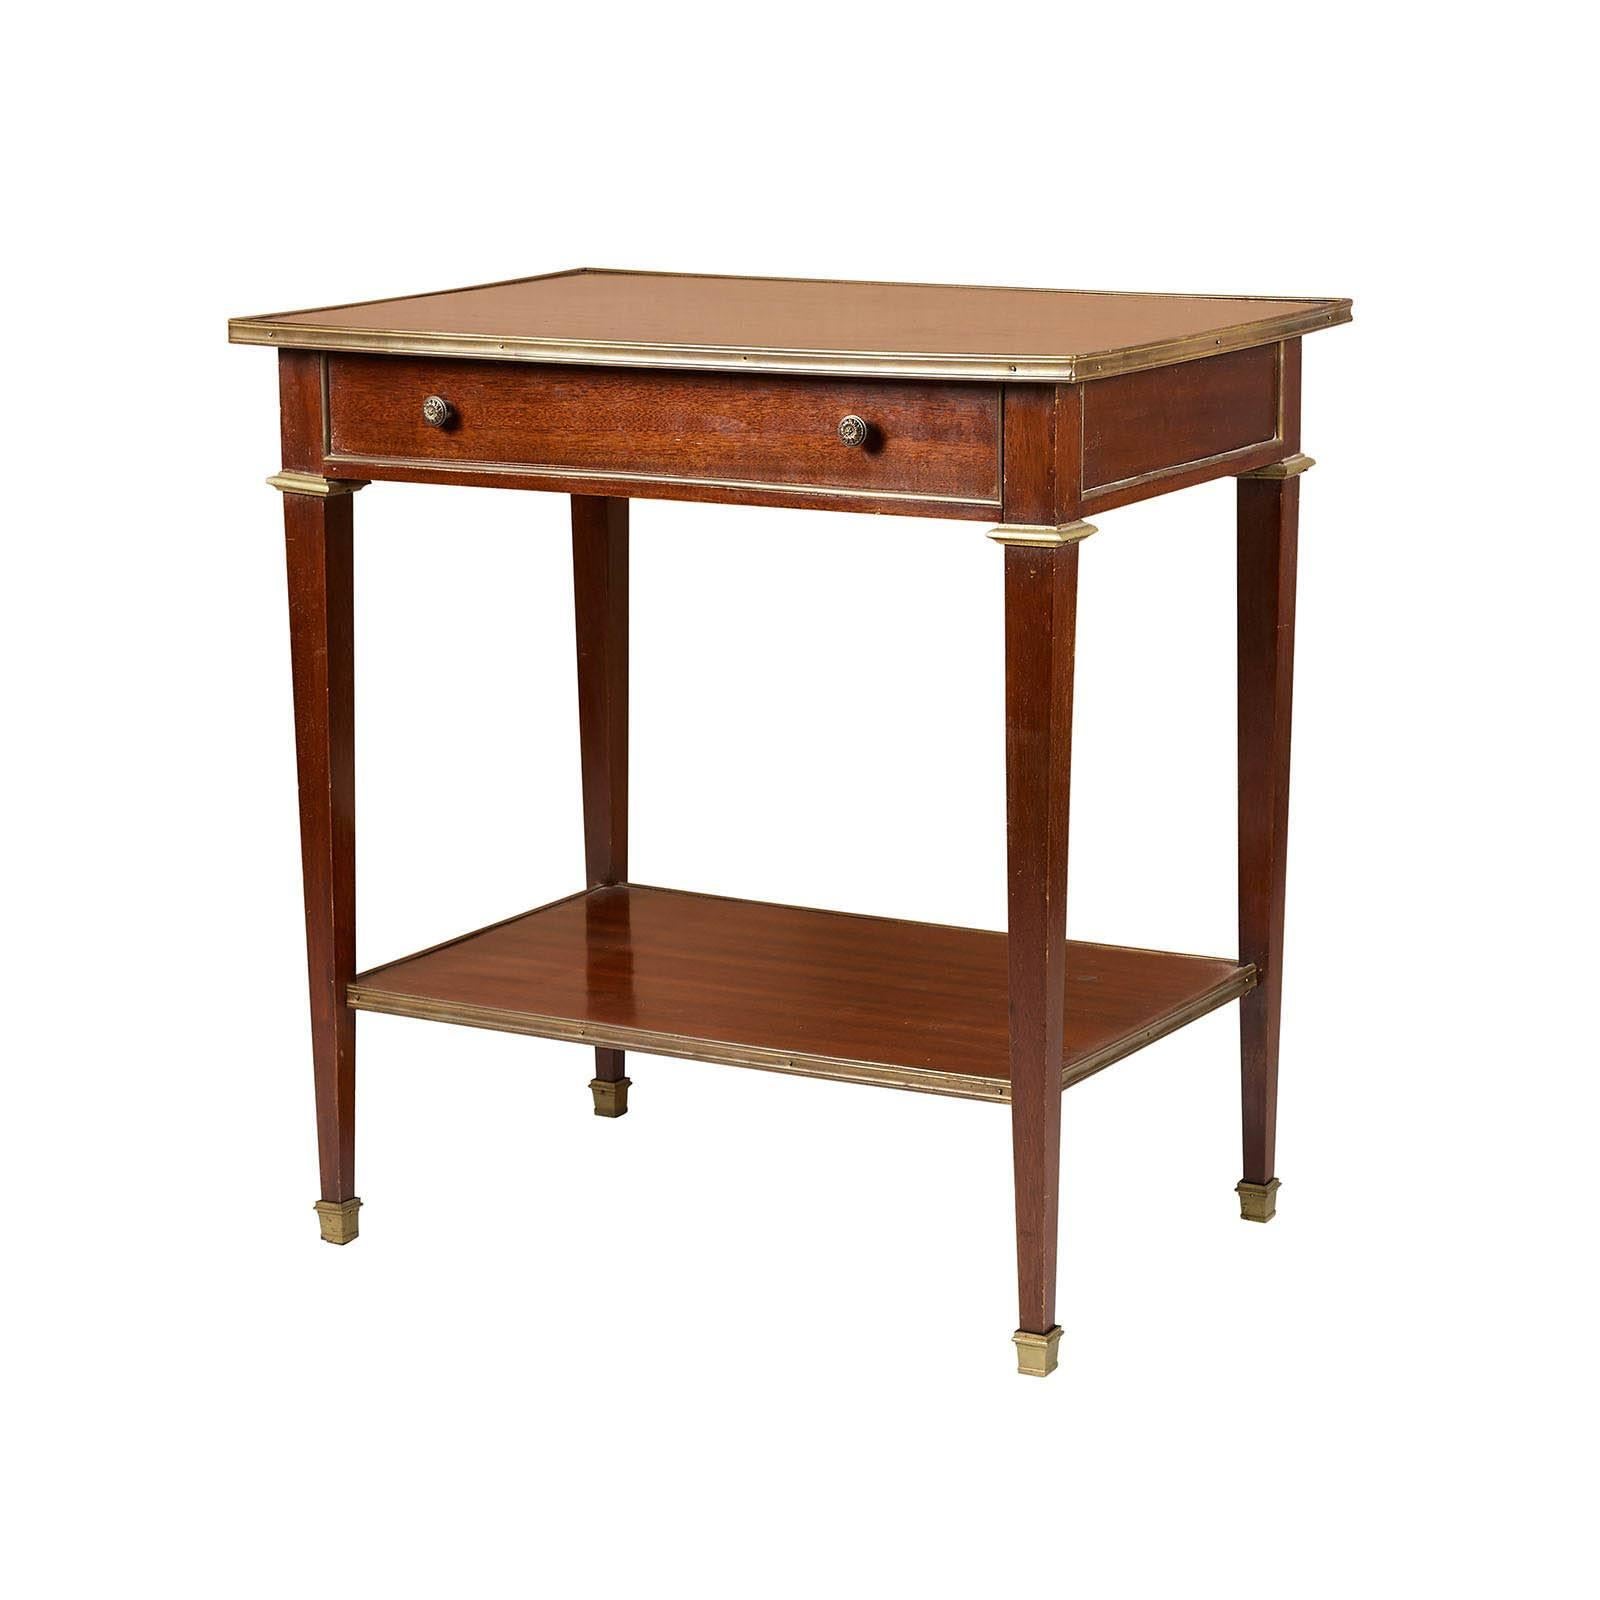 An early 20th century Swedish mahogany one drawer side table with bronze mounts, circa 1900.